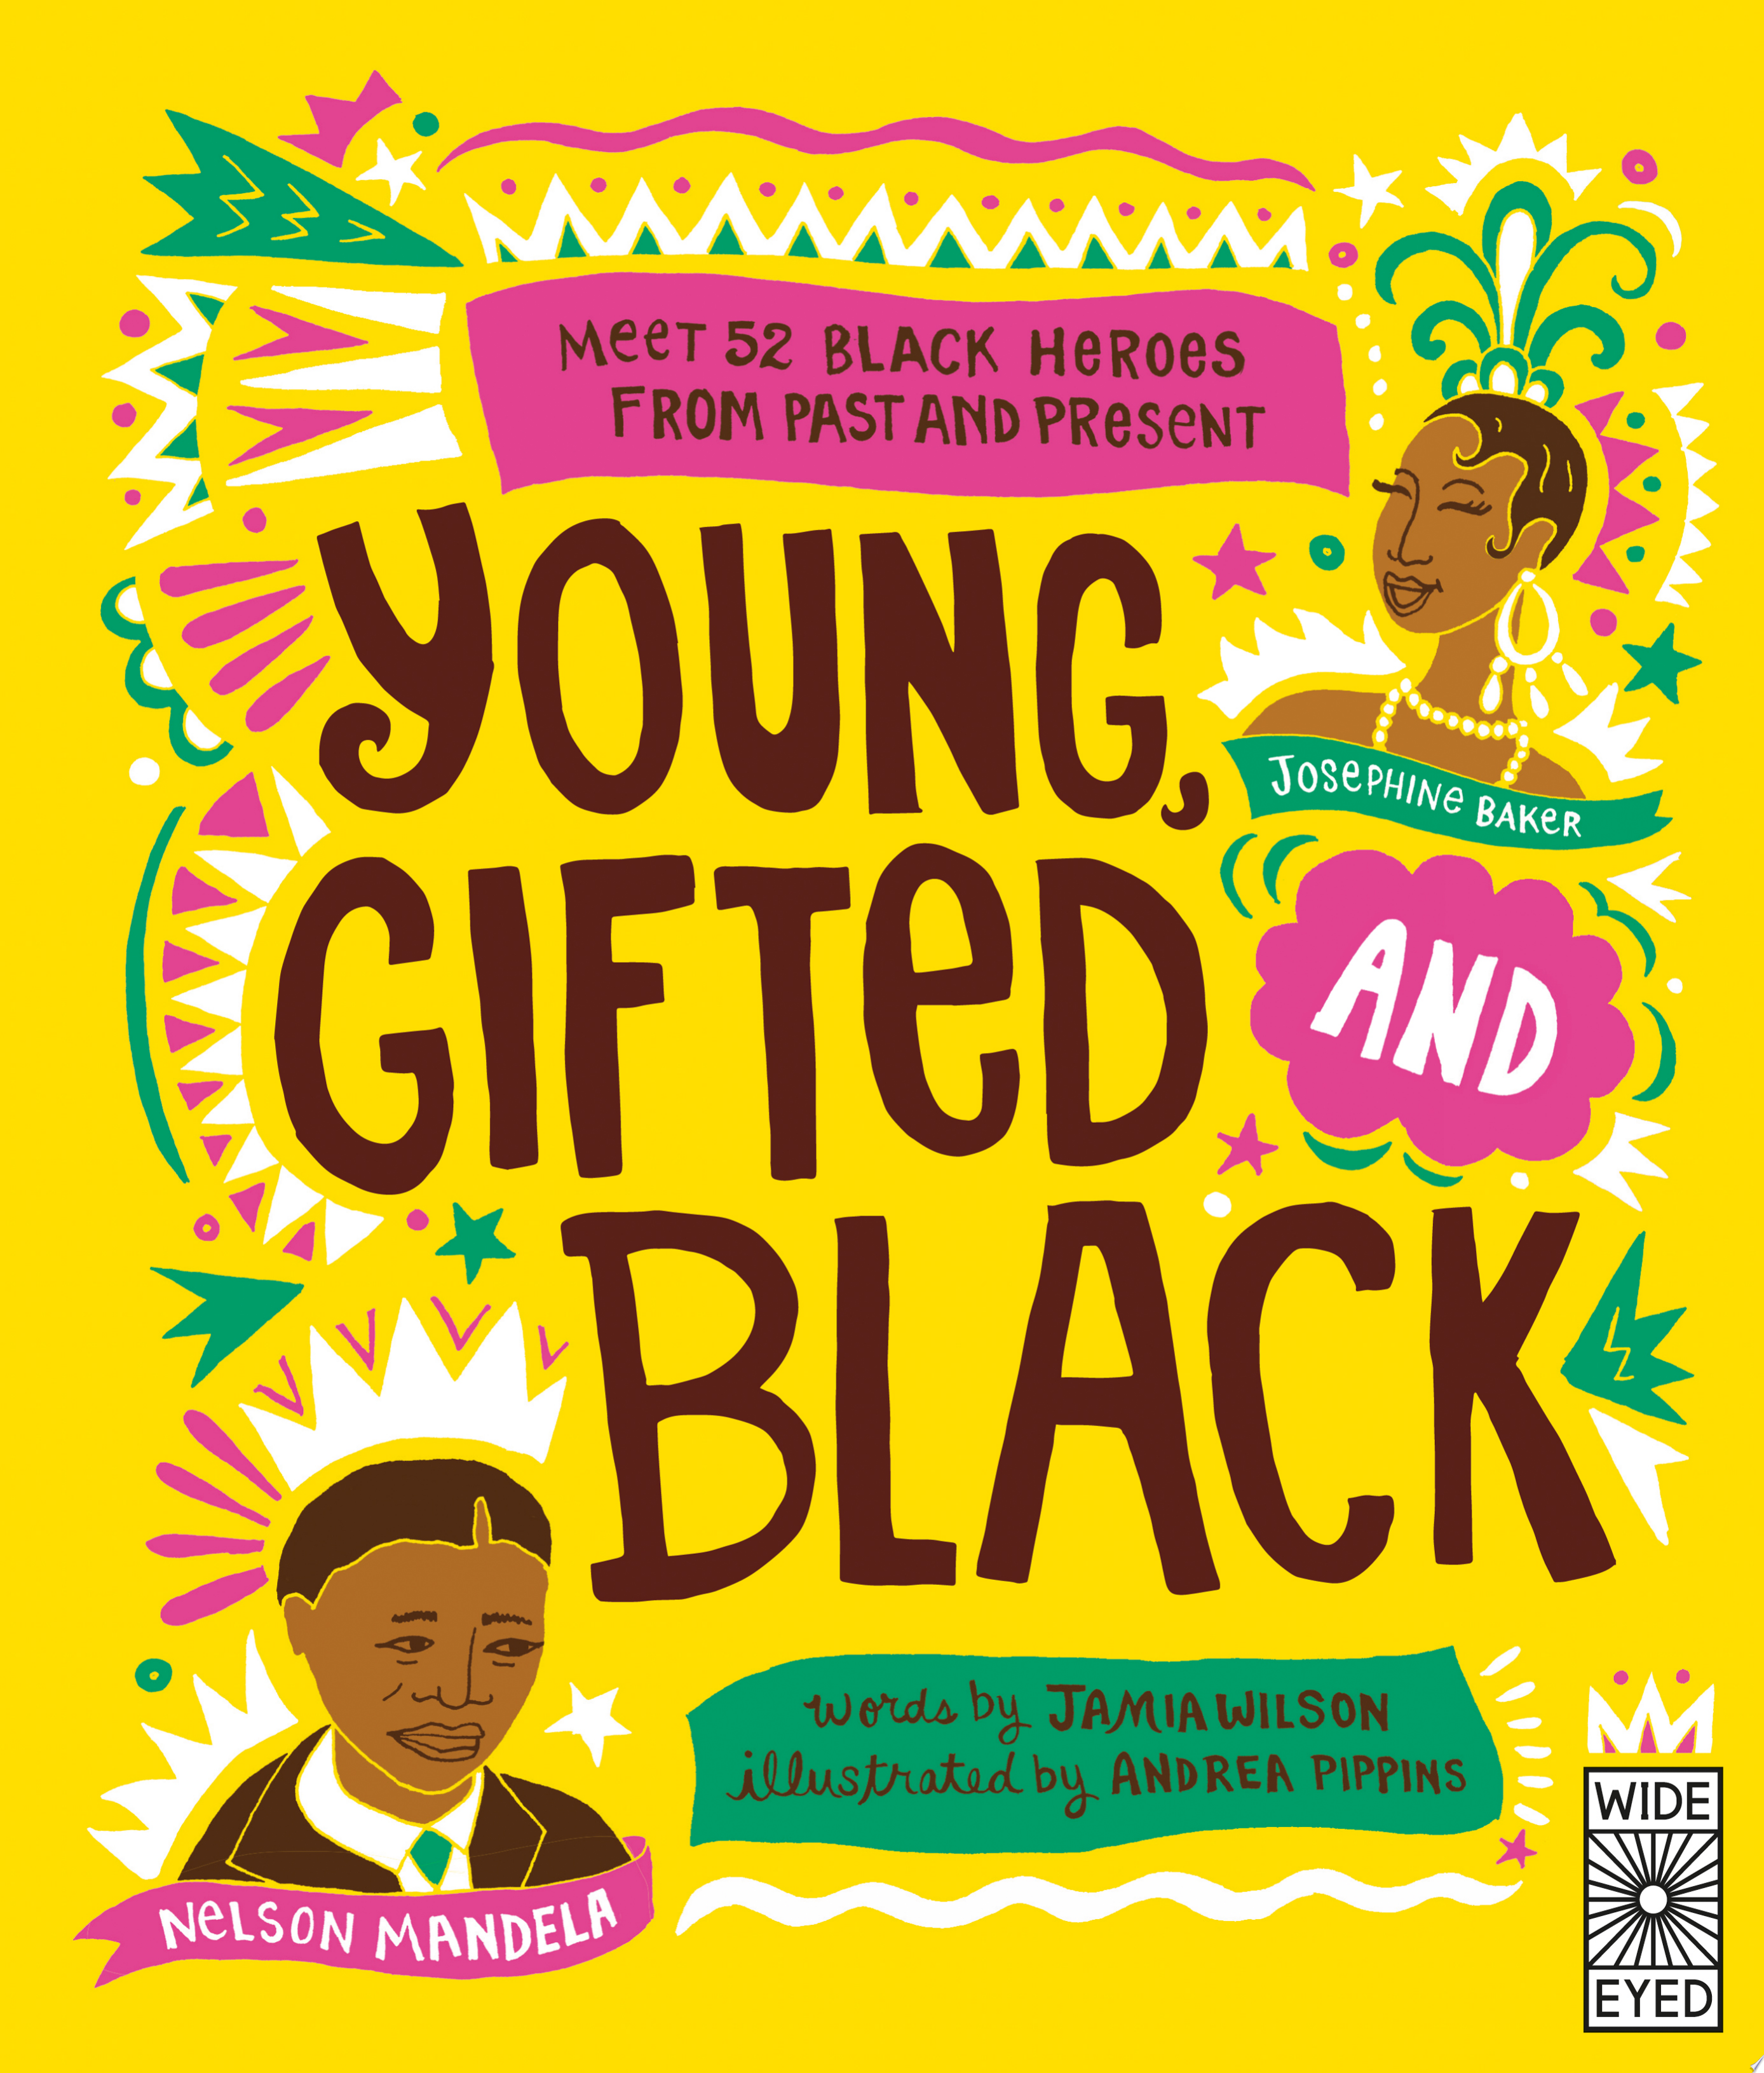 Image for "Young Gifted and Black" - a bright yellow cover featuring graphic text